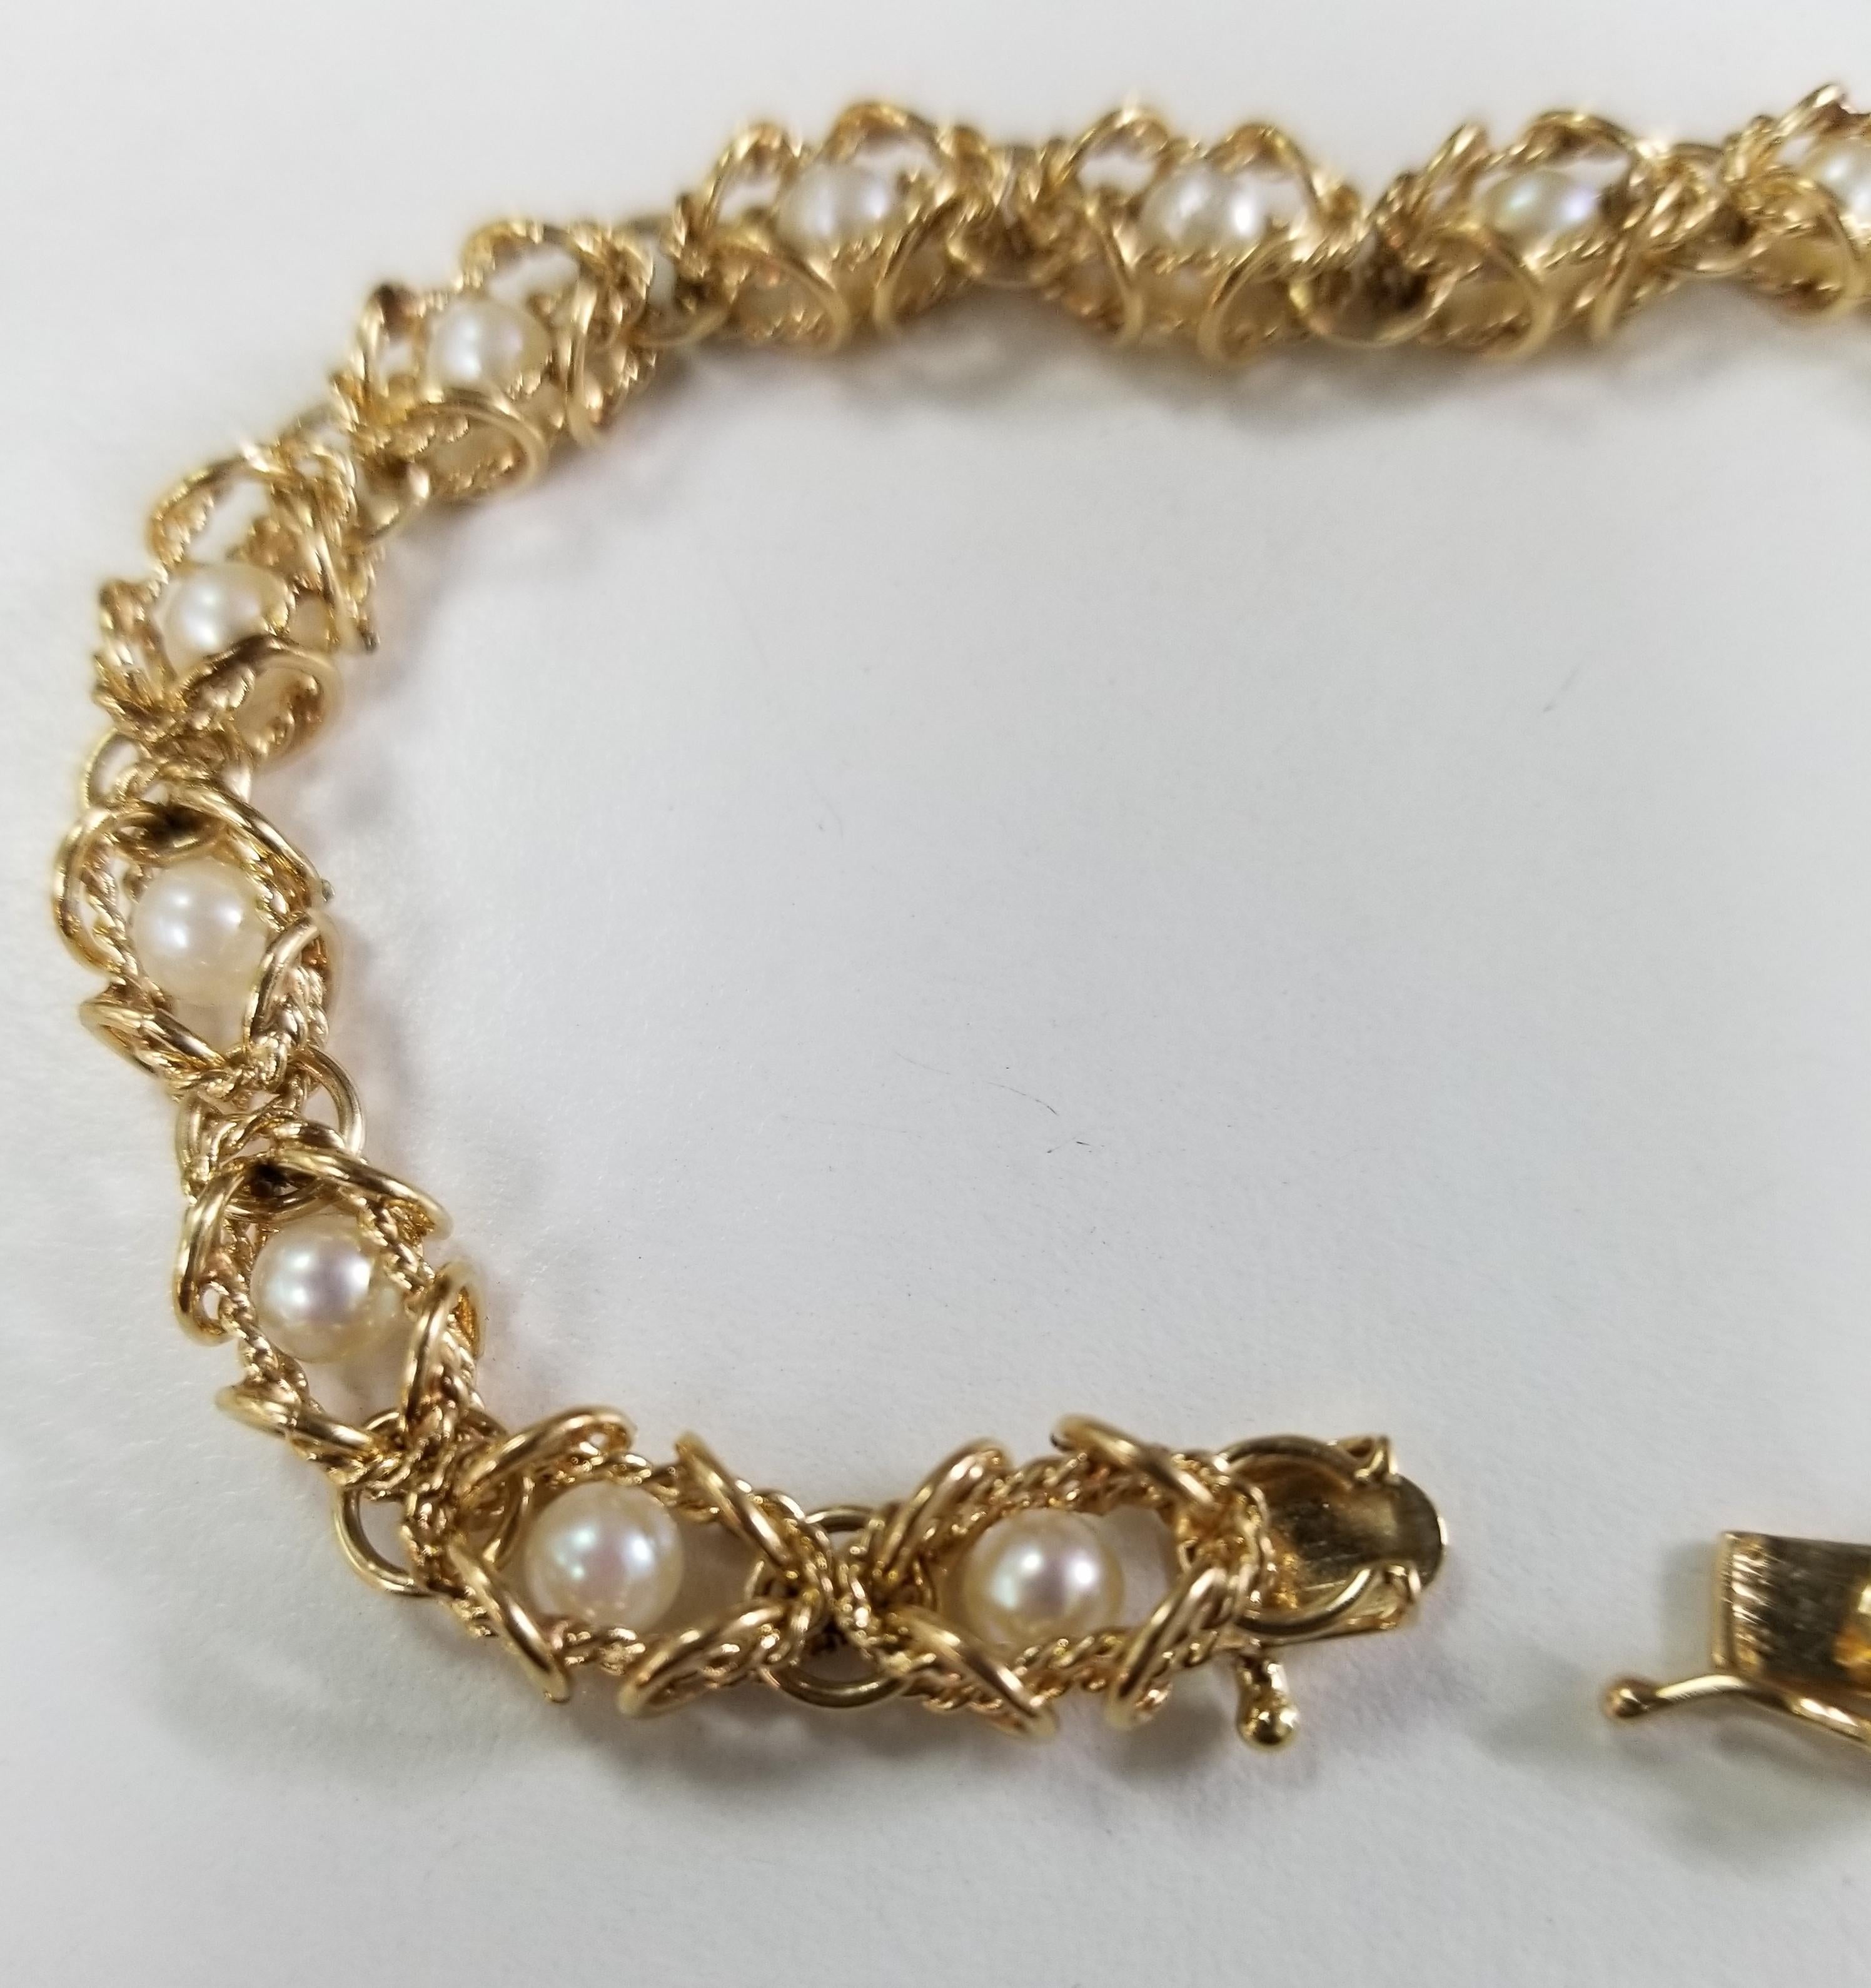 14 karat yellow gold pearl bracelet containing 15 4.5mm round pearls in a cage, length is 7 3/4 inches.